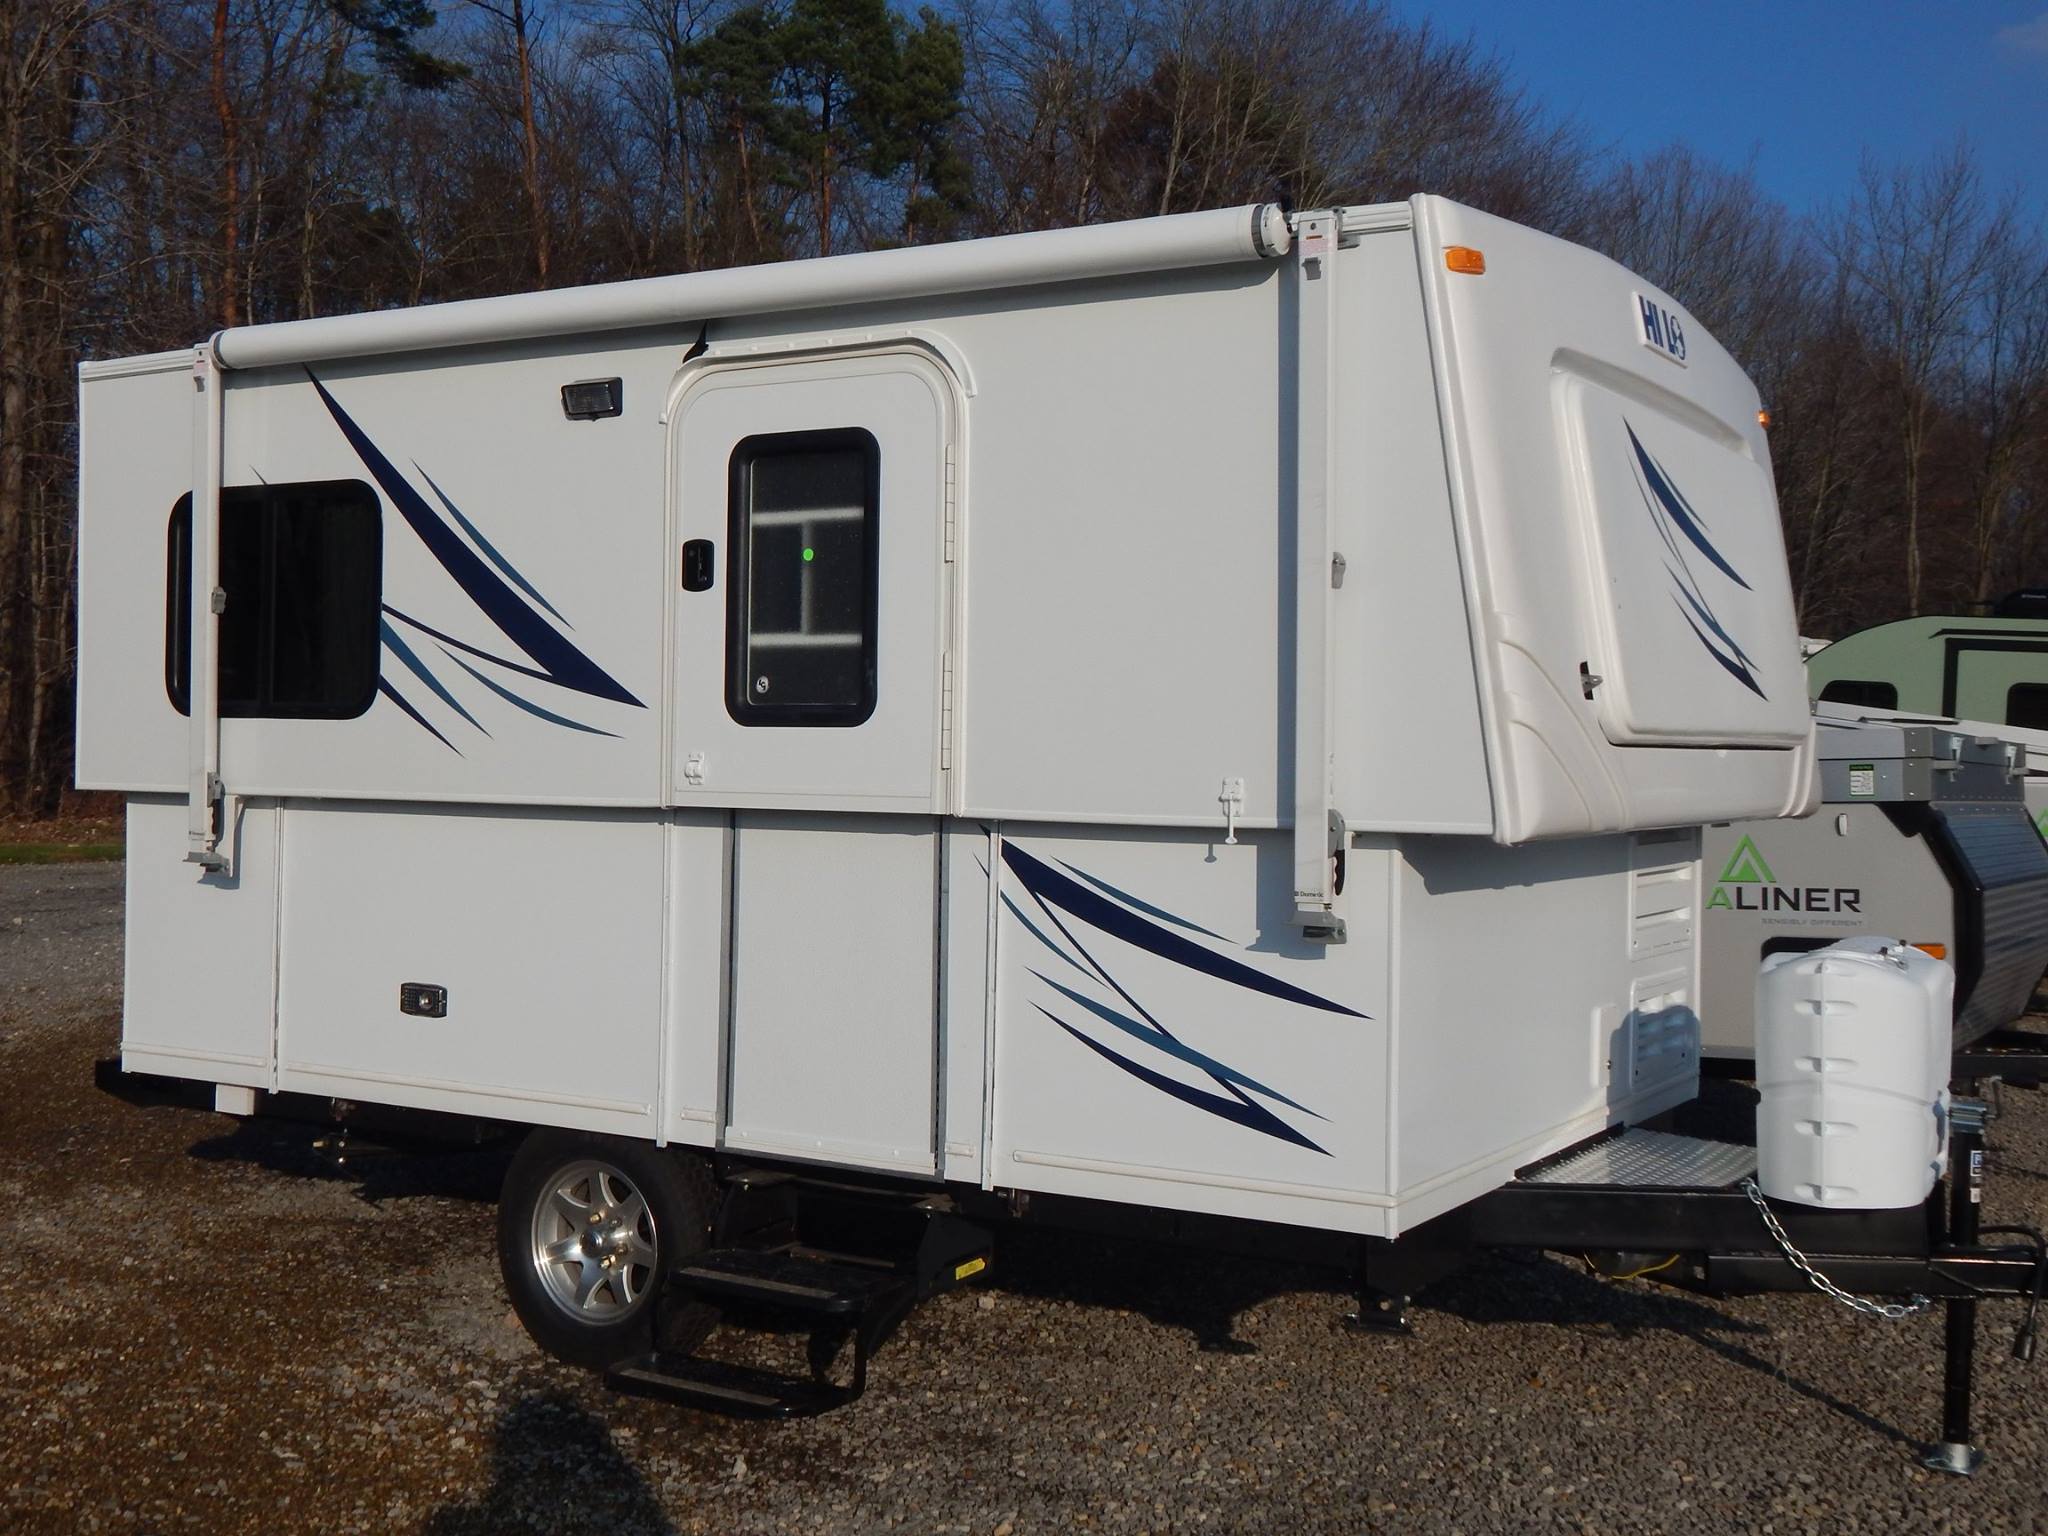 compact travel trailers | The Small Trailer Enthusiast